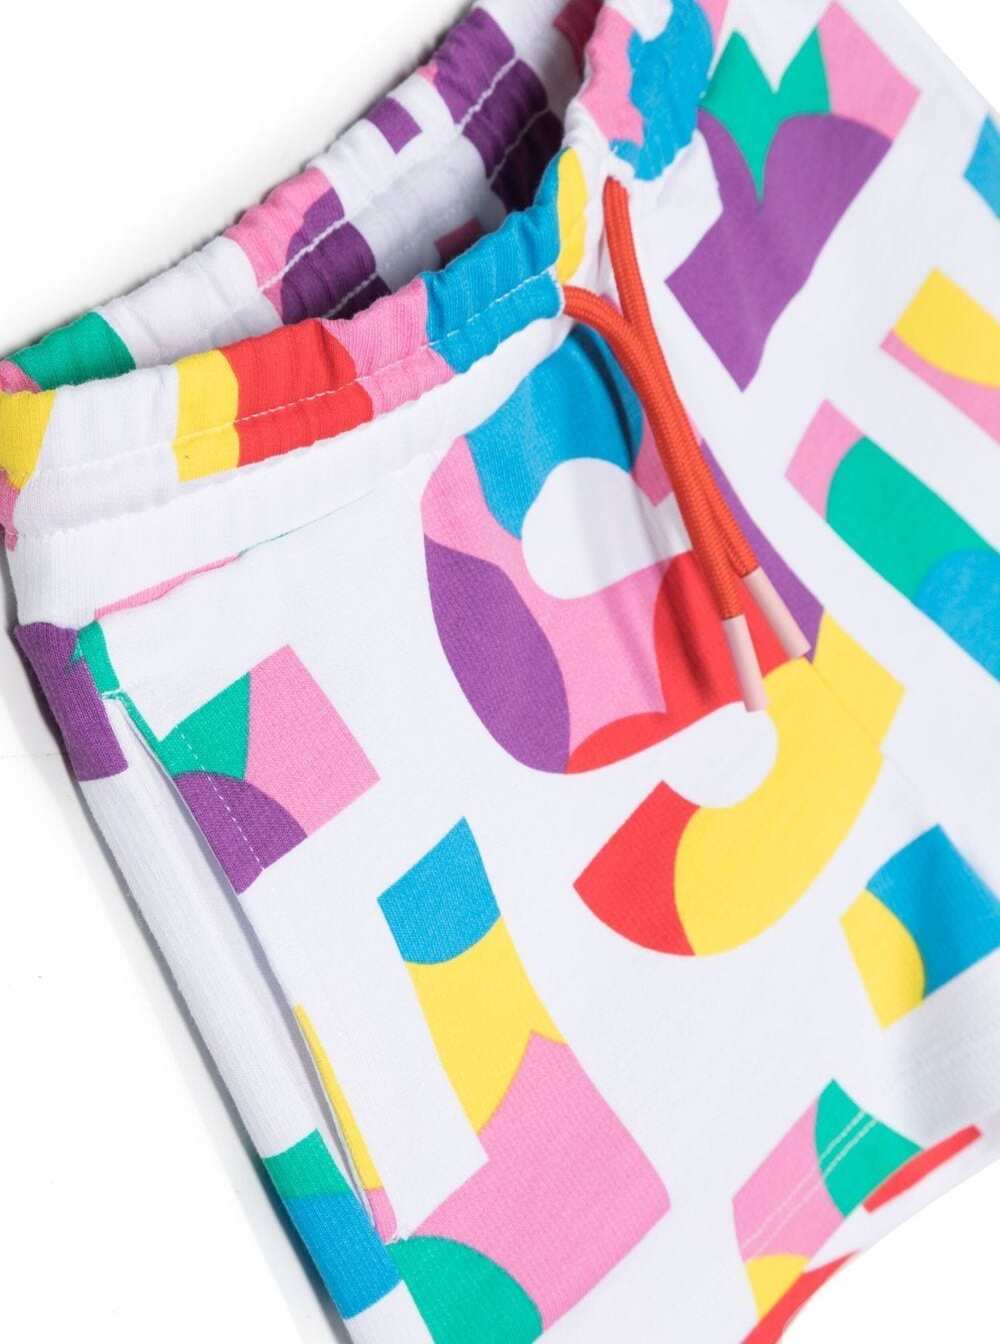 Shop Stella Mccartney Bermuda Shorts With All-over Logo Graphic Print In Multicolored Cotton Girl